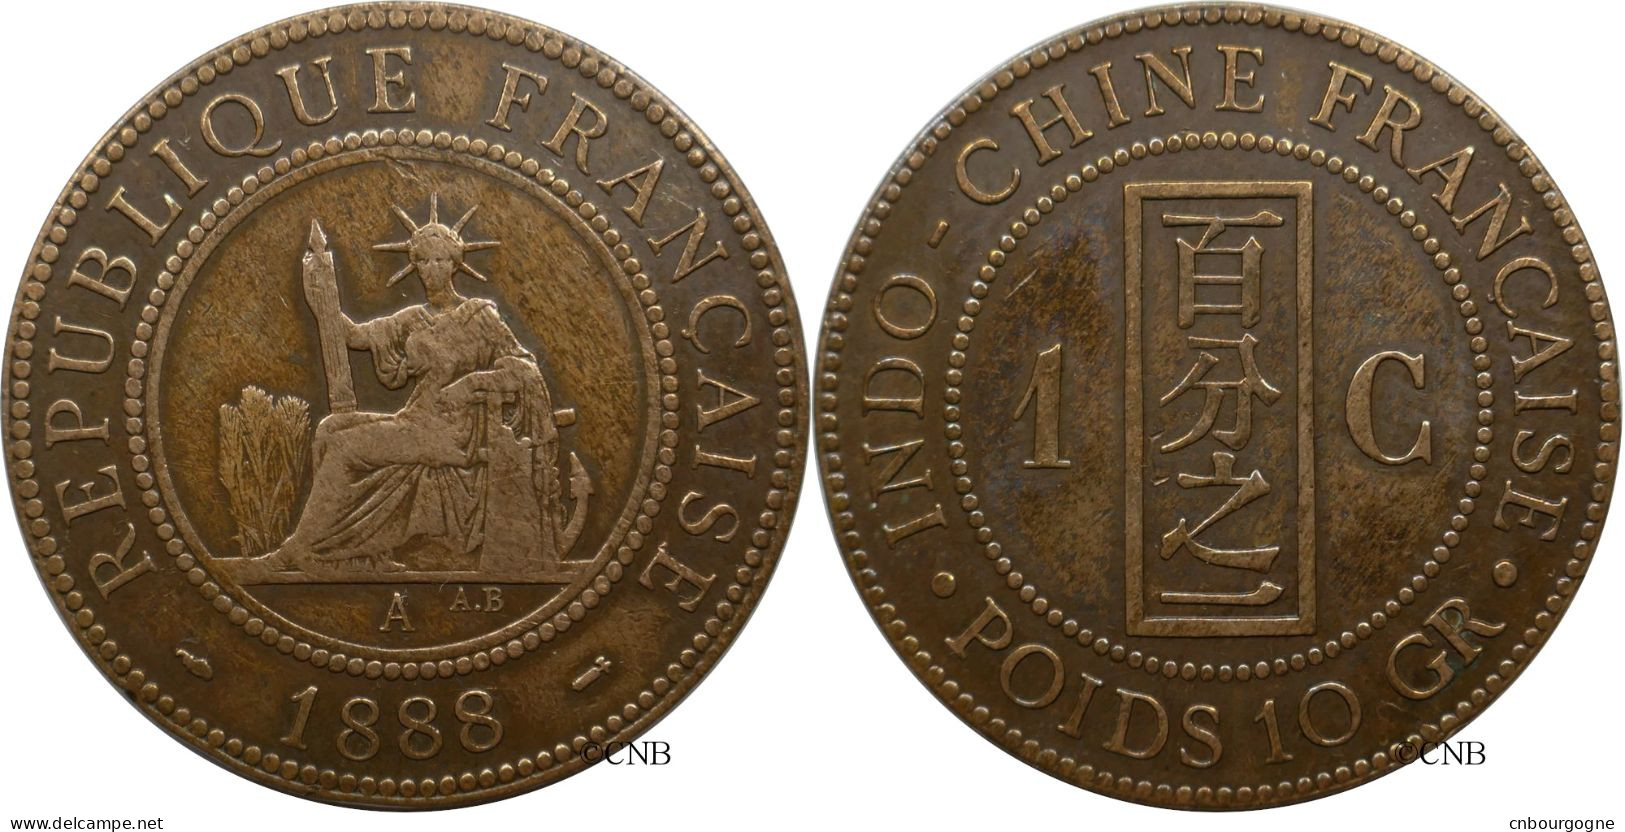 Indochine - Colonie Française - 1 Centime 1888 A - TTB/XF40 - Mon5441 - French Indochina